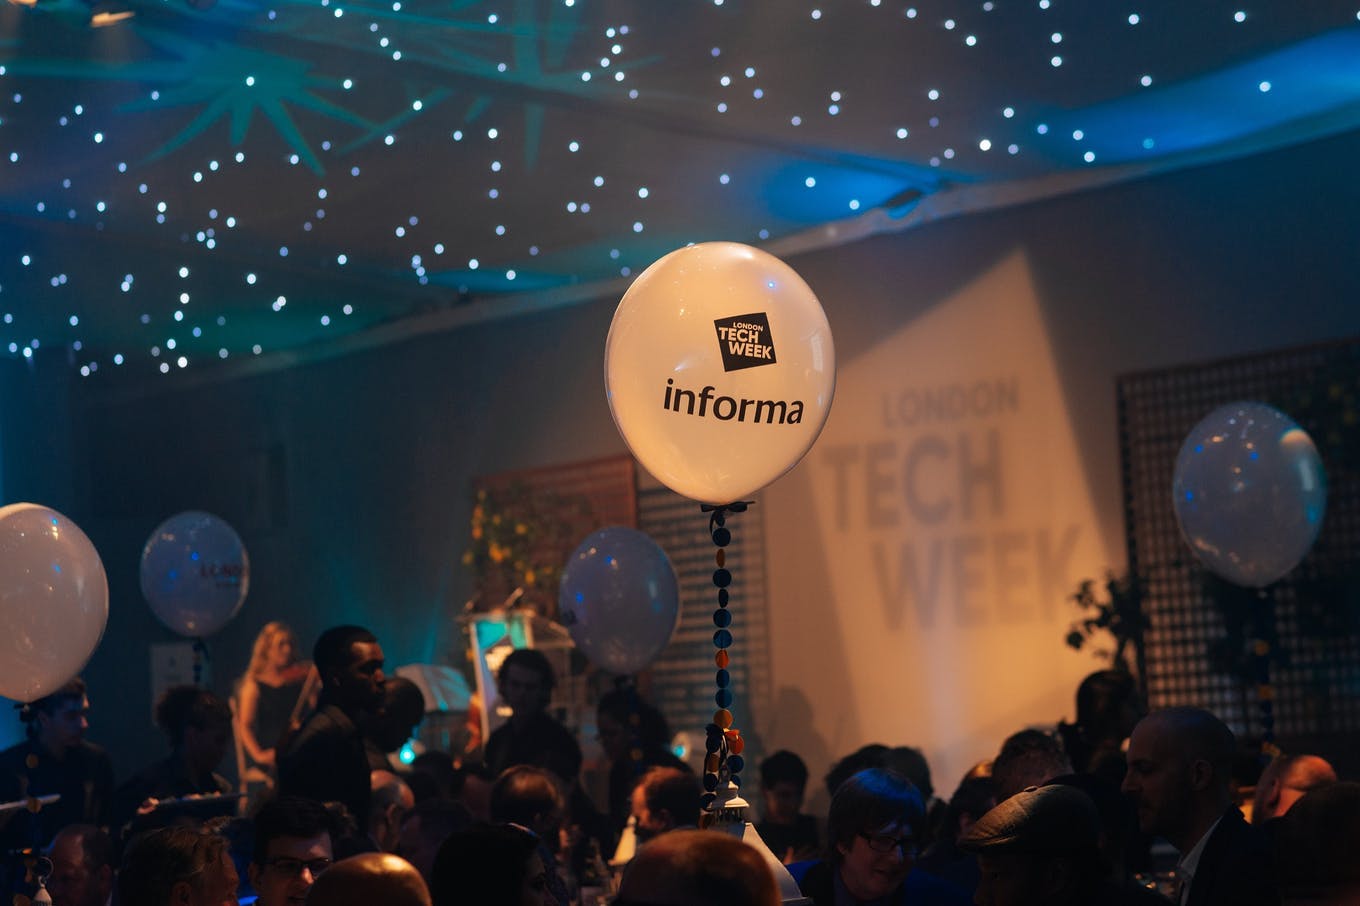 What to expect from London Tech Week